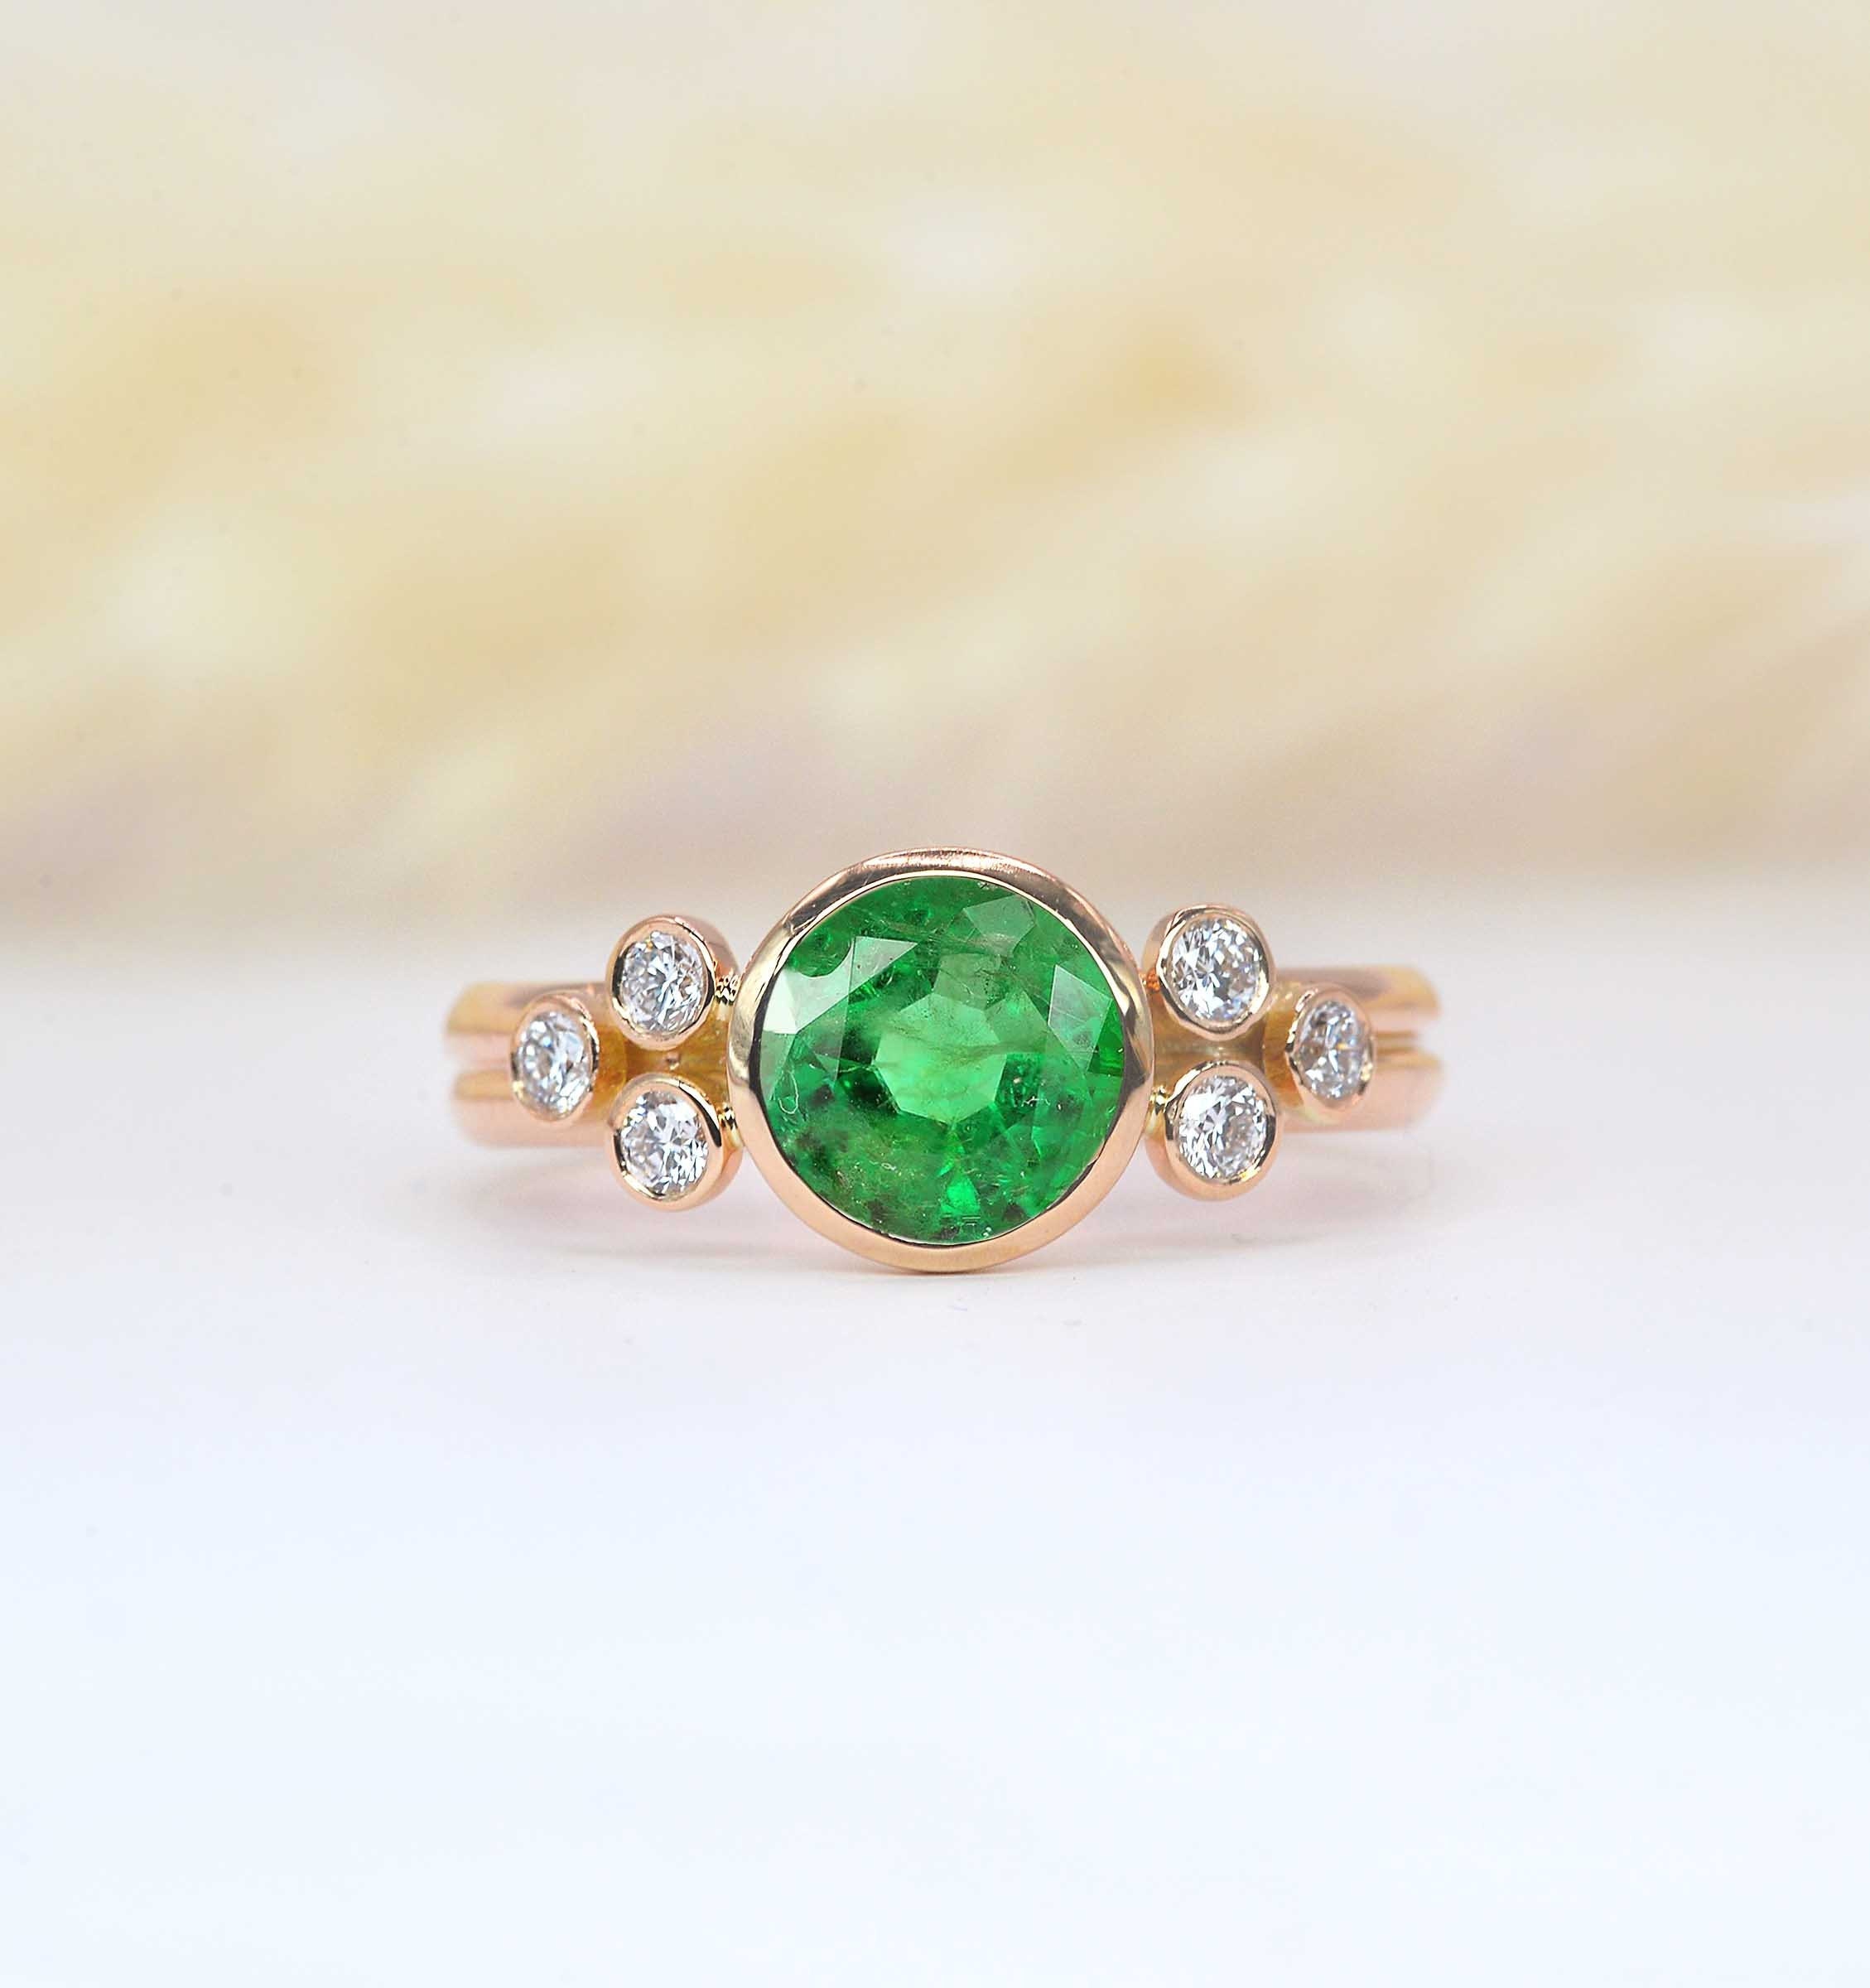 Emerald & Diamond Featuring Cluster Ring | Art Deco Vintage Anniversary, Engagement, Birthday Gift For Her